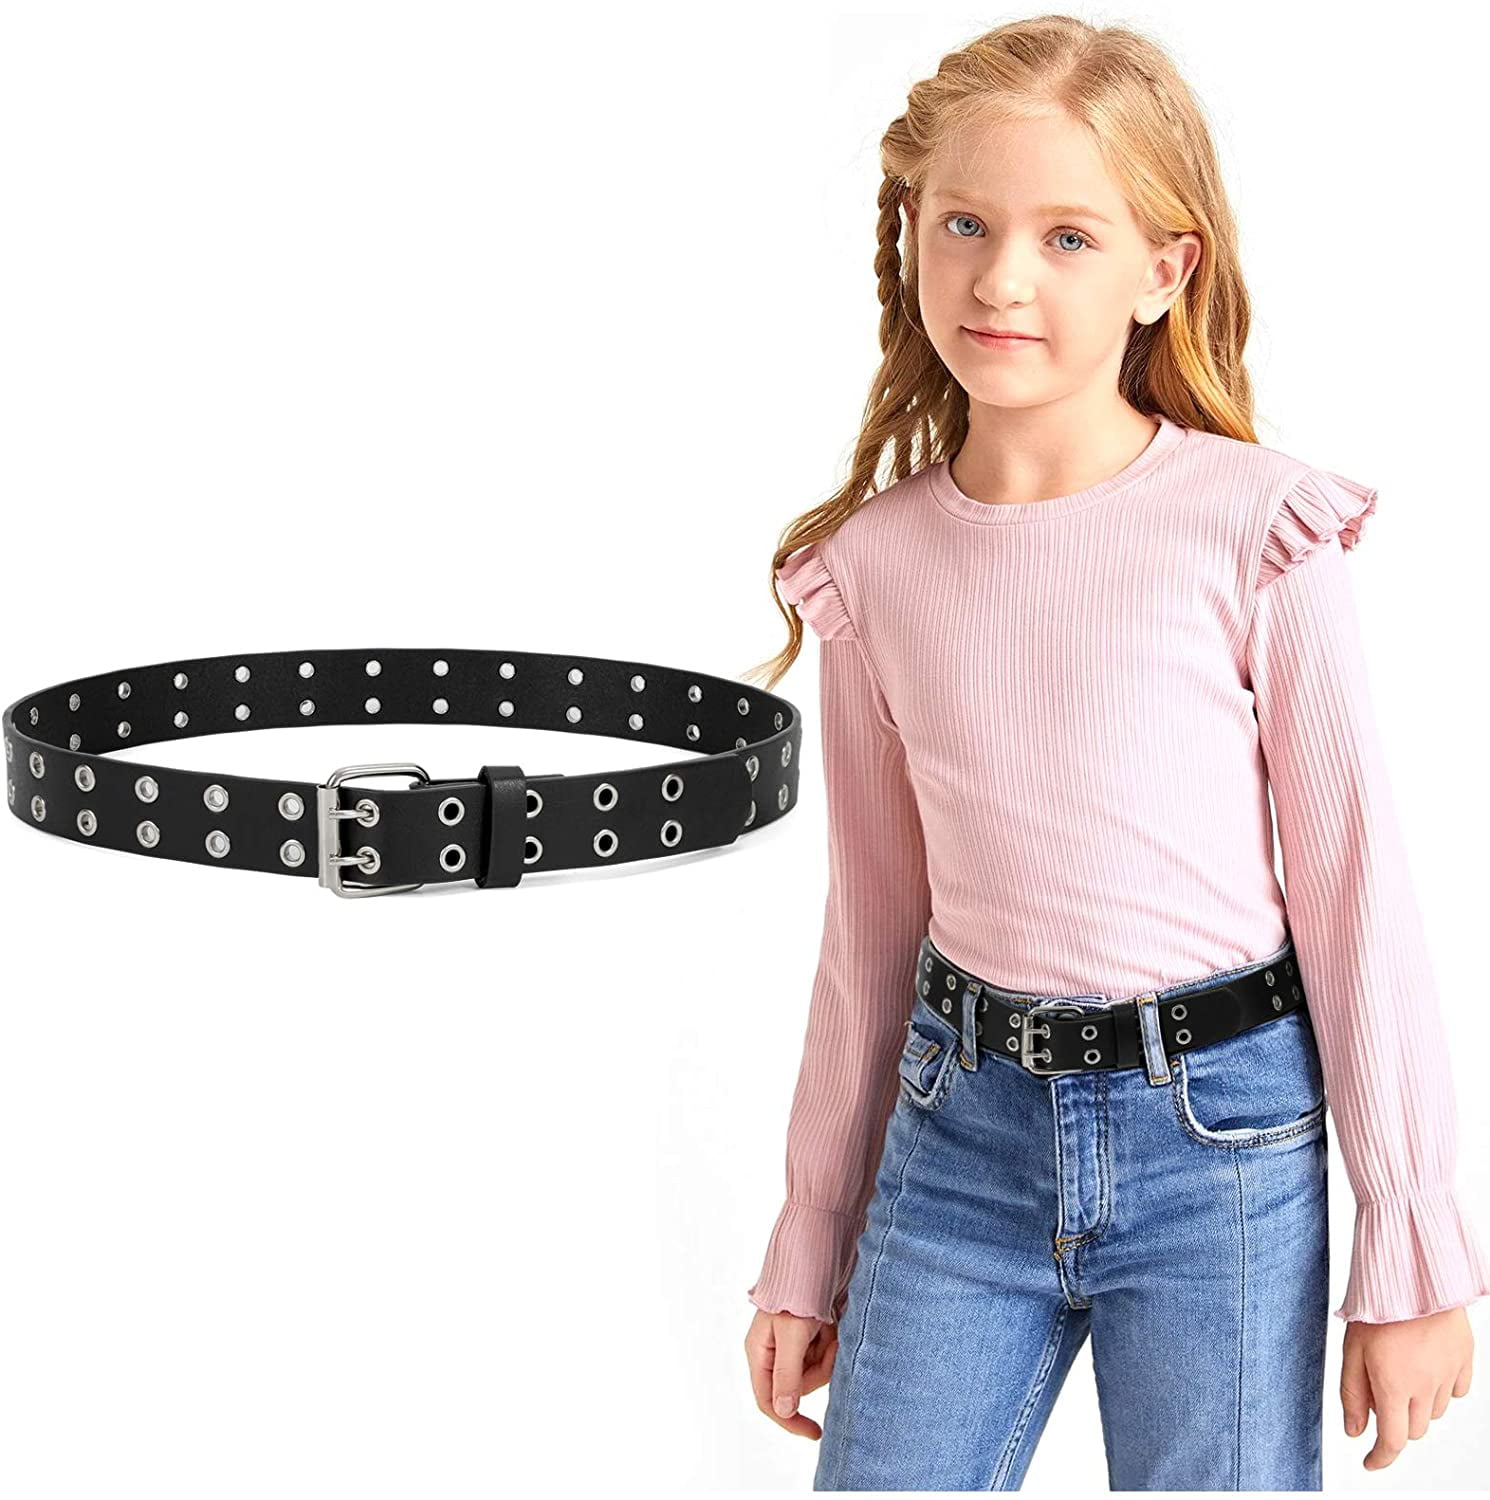 Kids Double Grommet Belts With Holes for Girls Boys PU Leather Two Row Grommet Waist Belt for Jeans Dress 